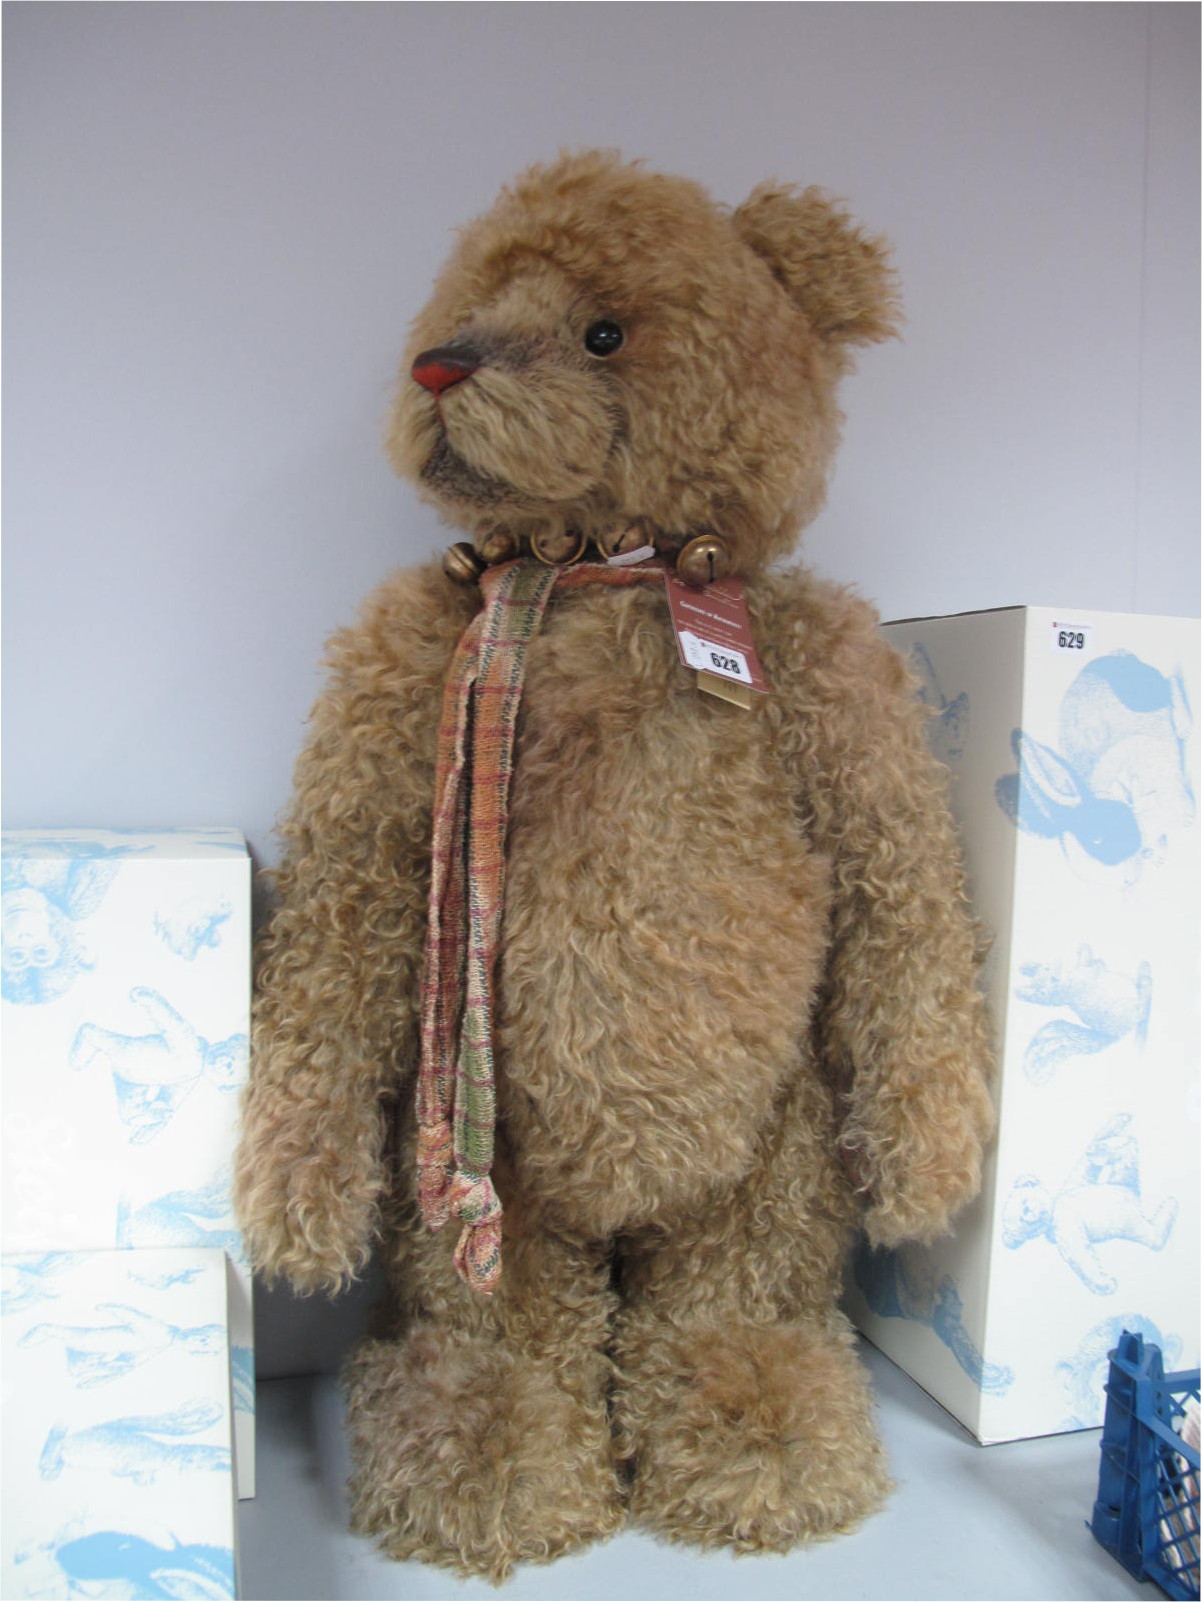 A Modern Teddy Bear 'Rupert' by Charlie Bears from the Isobelle Collection, jointed and able to